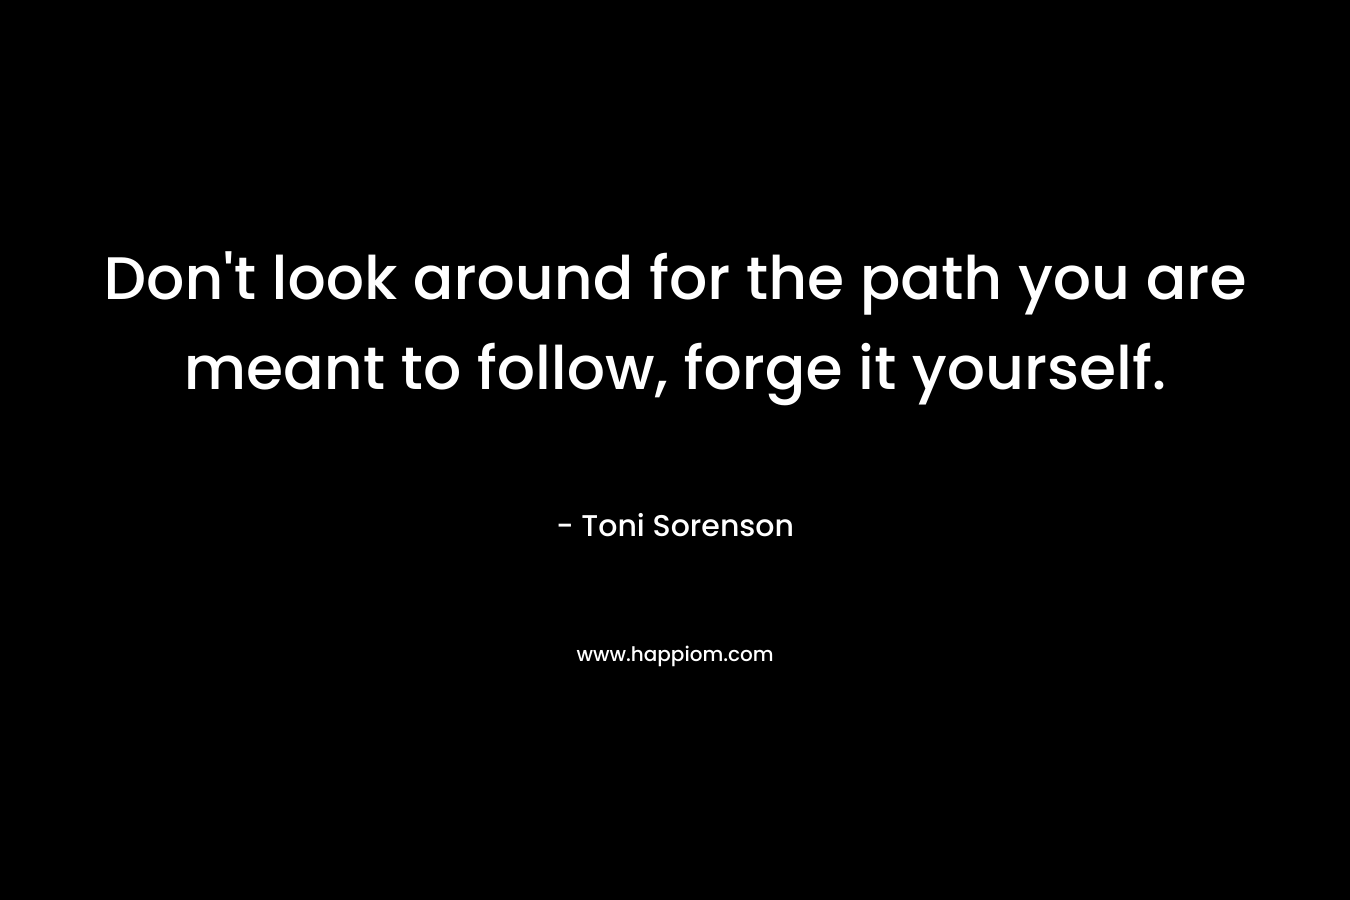 Don’t look around for the path you are meant to follow, forge it yourself. – Toni Sorenson